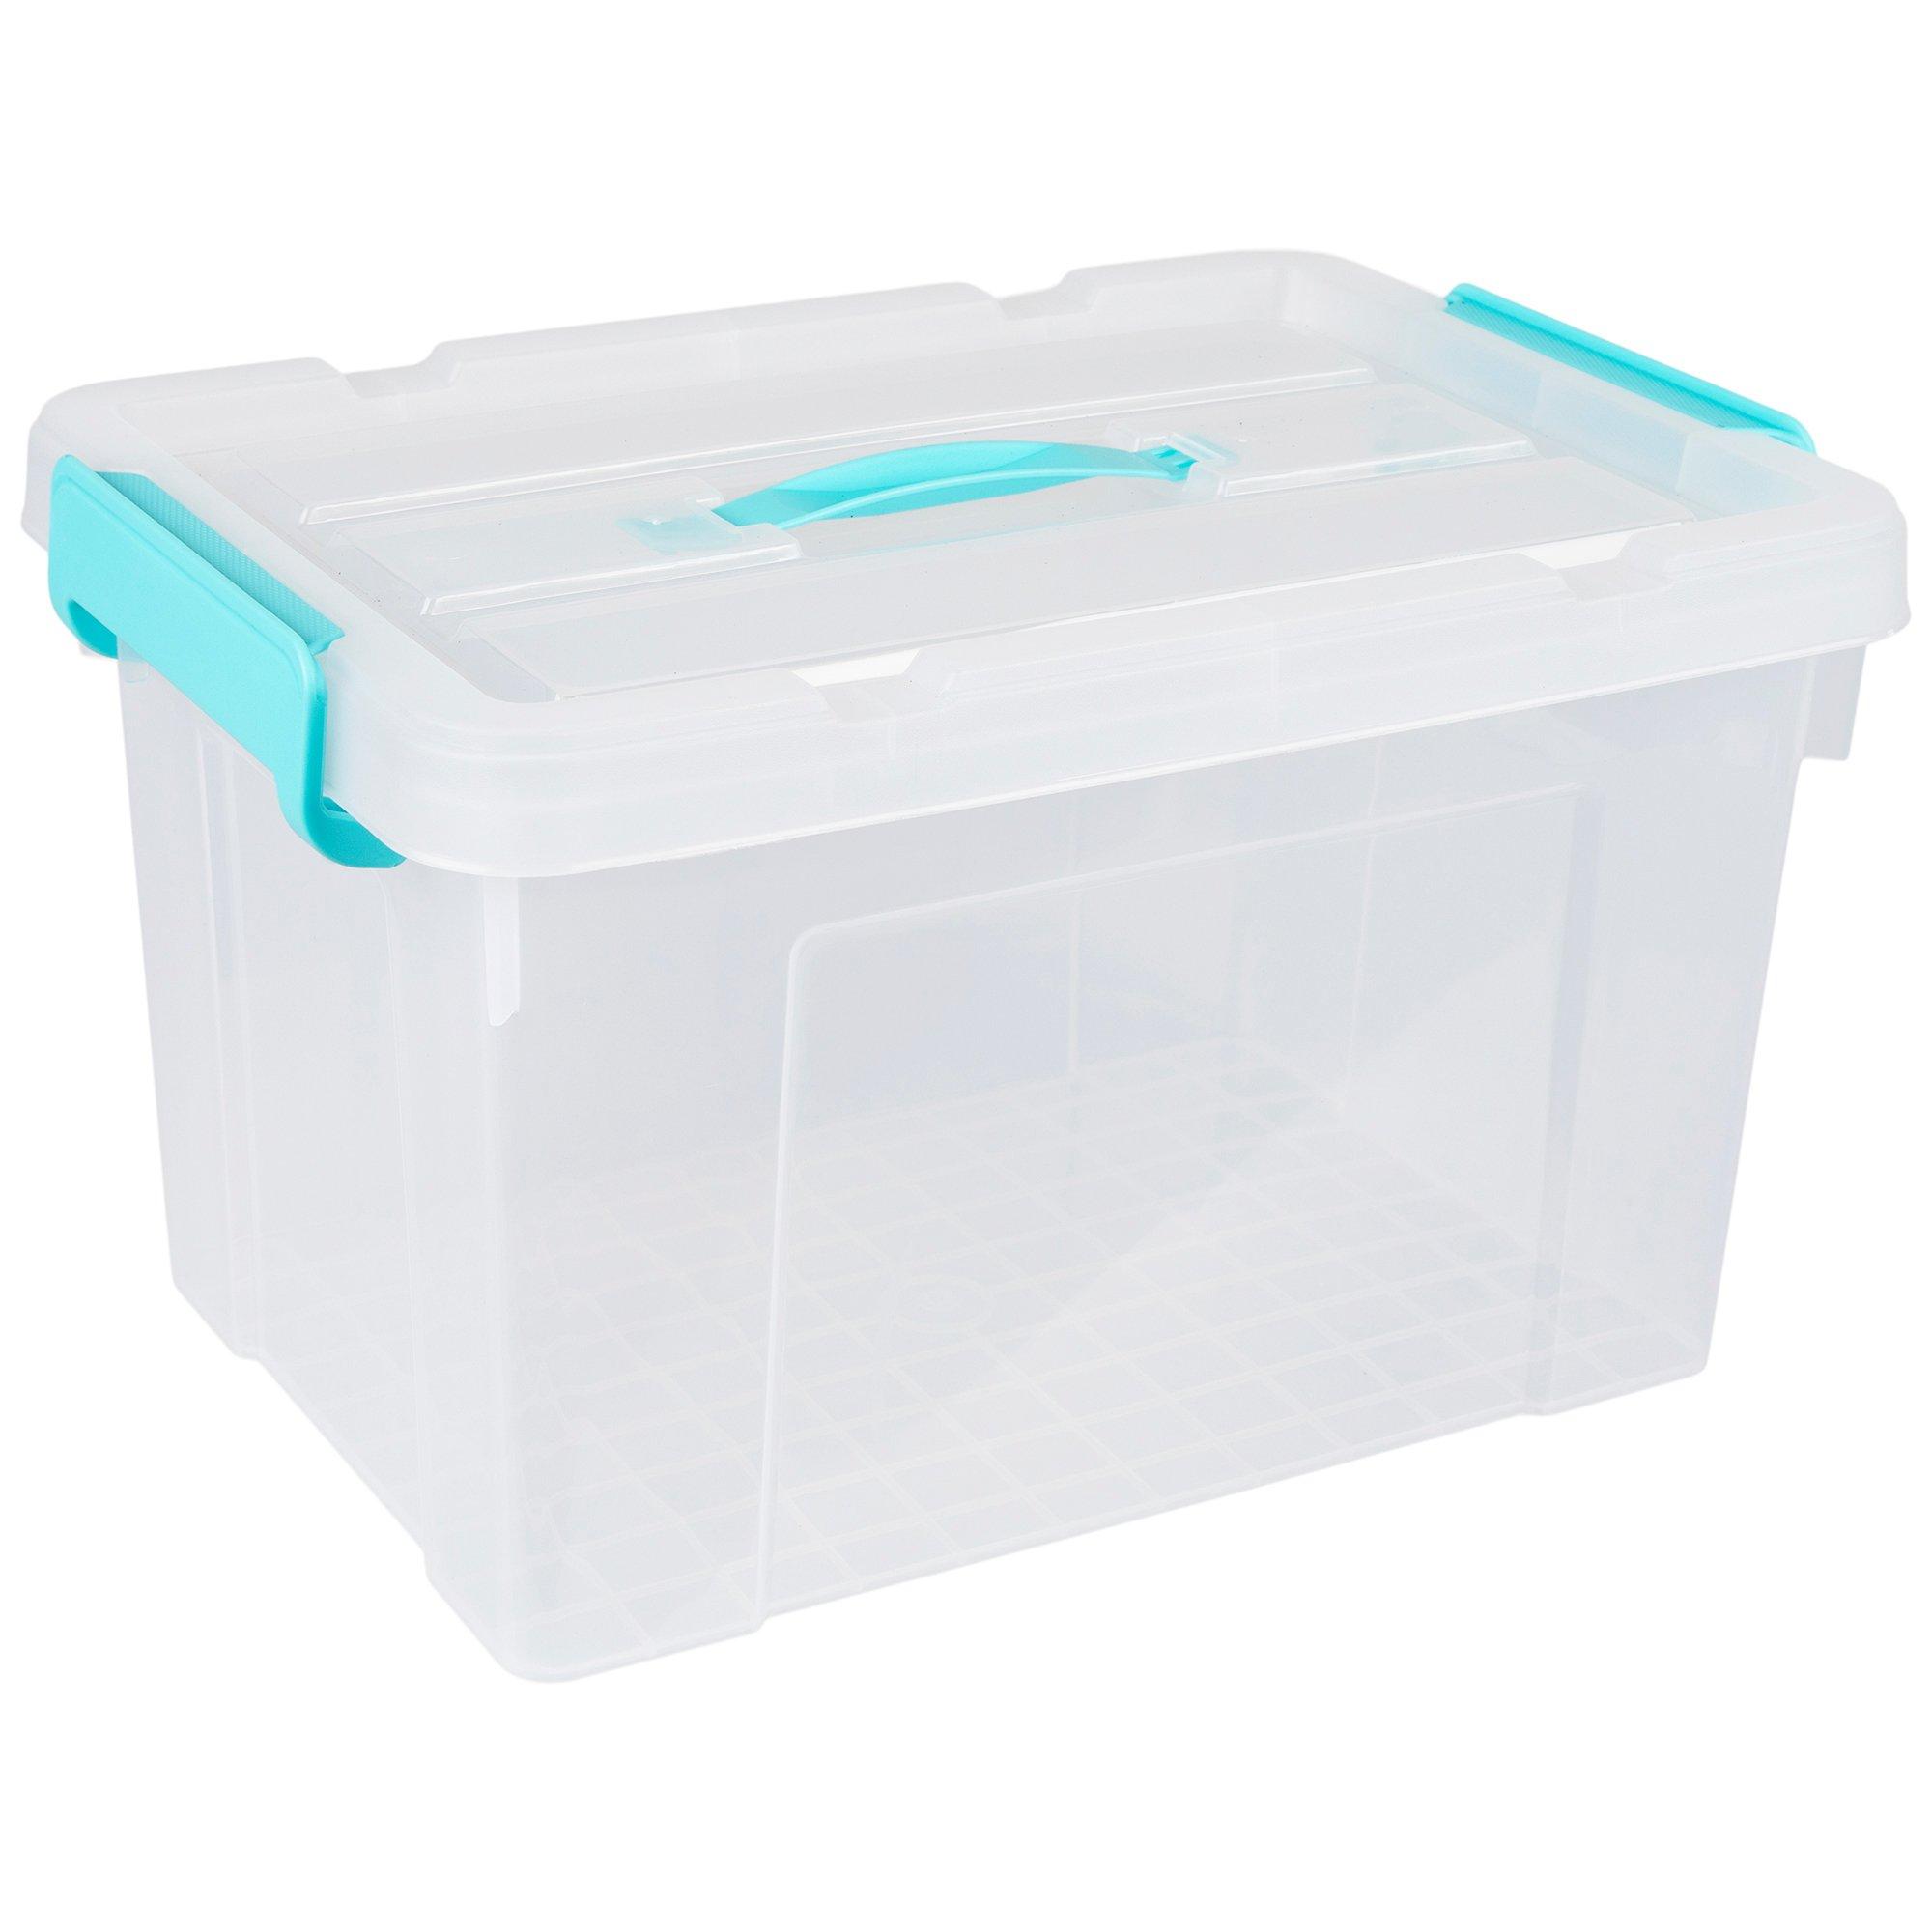 Stack & Carry 3-Layer Box & Tray